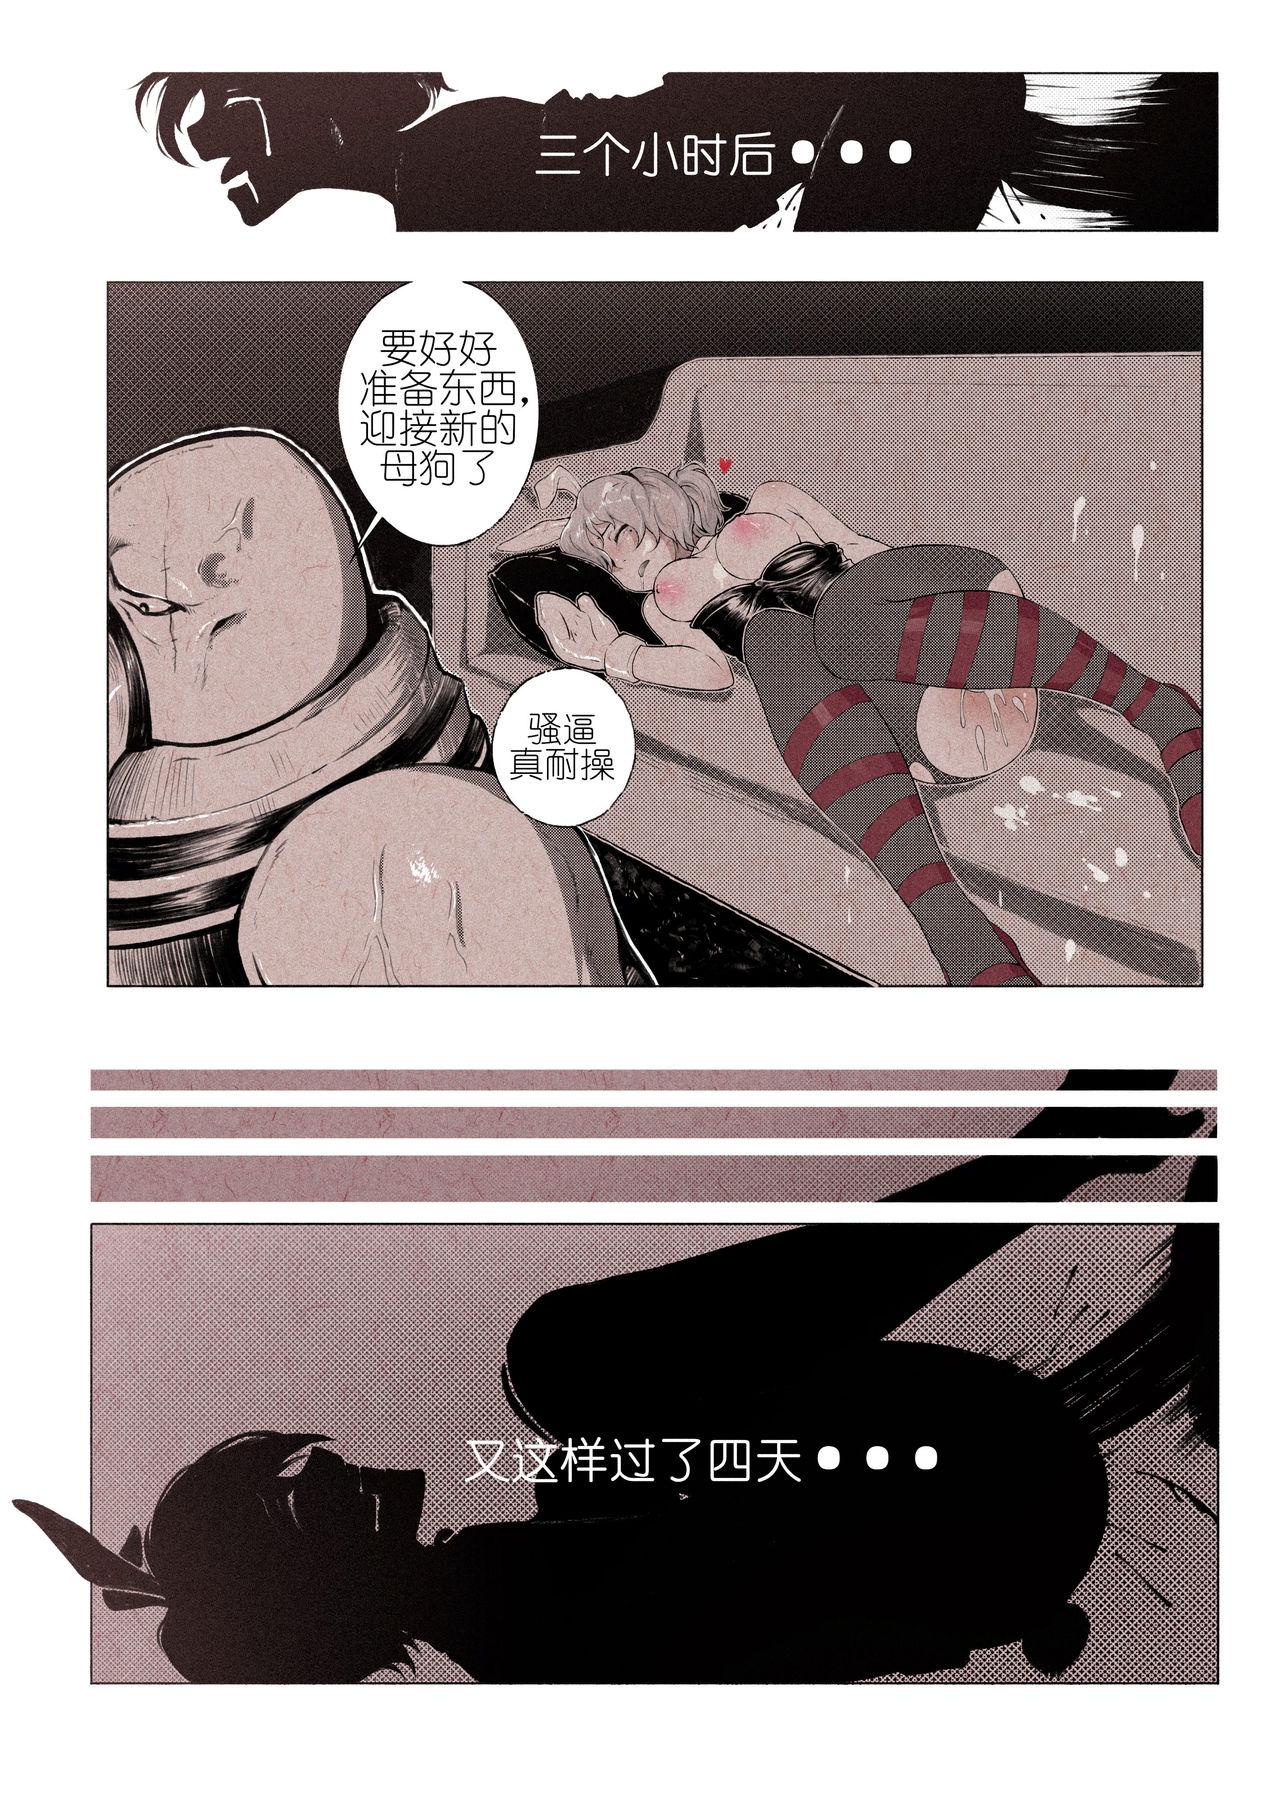 Amazing R18厄加特酒馆（中篇） - League of legends Toes - Page 5